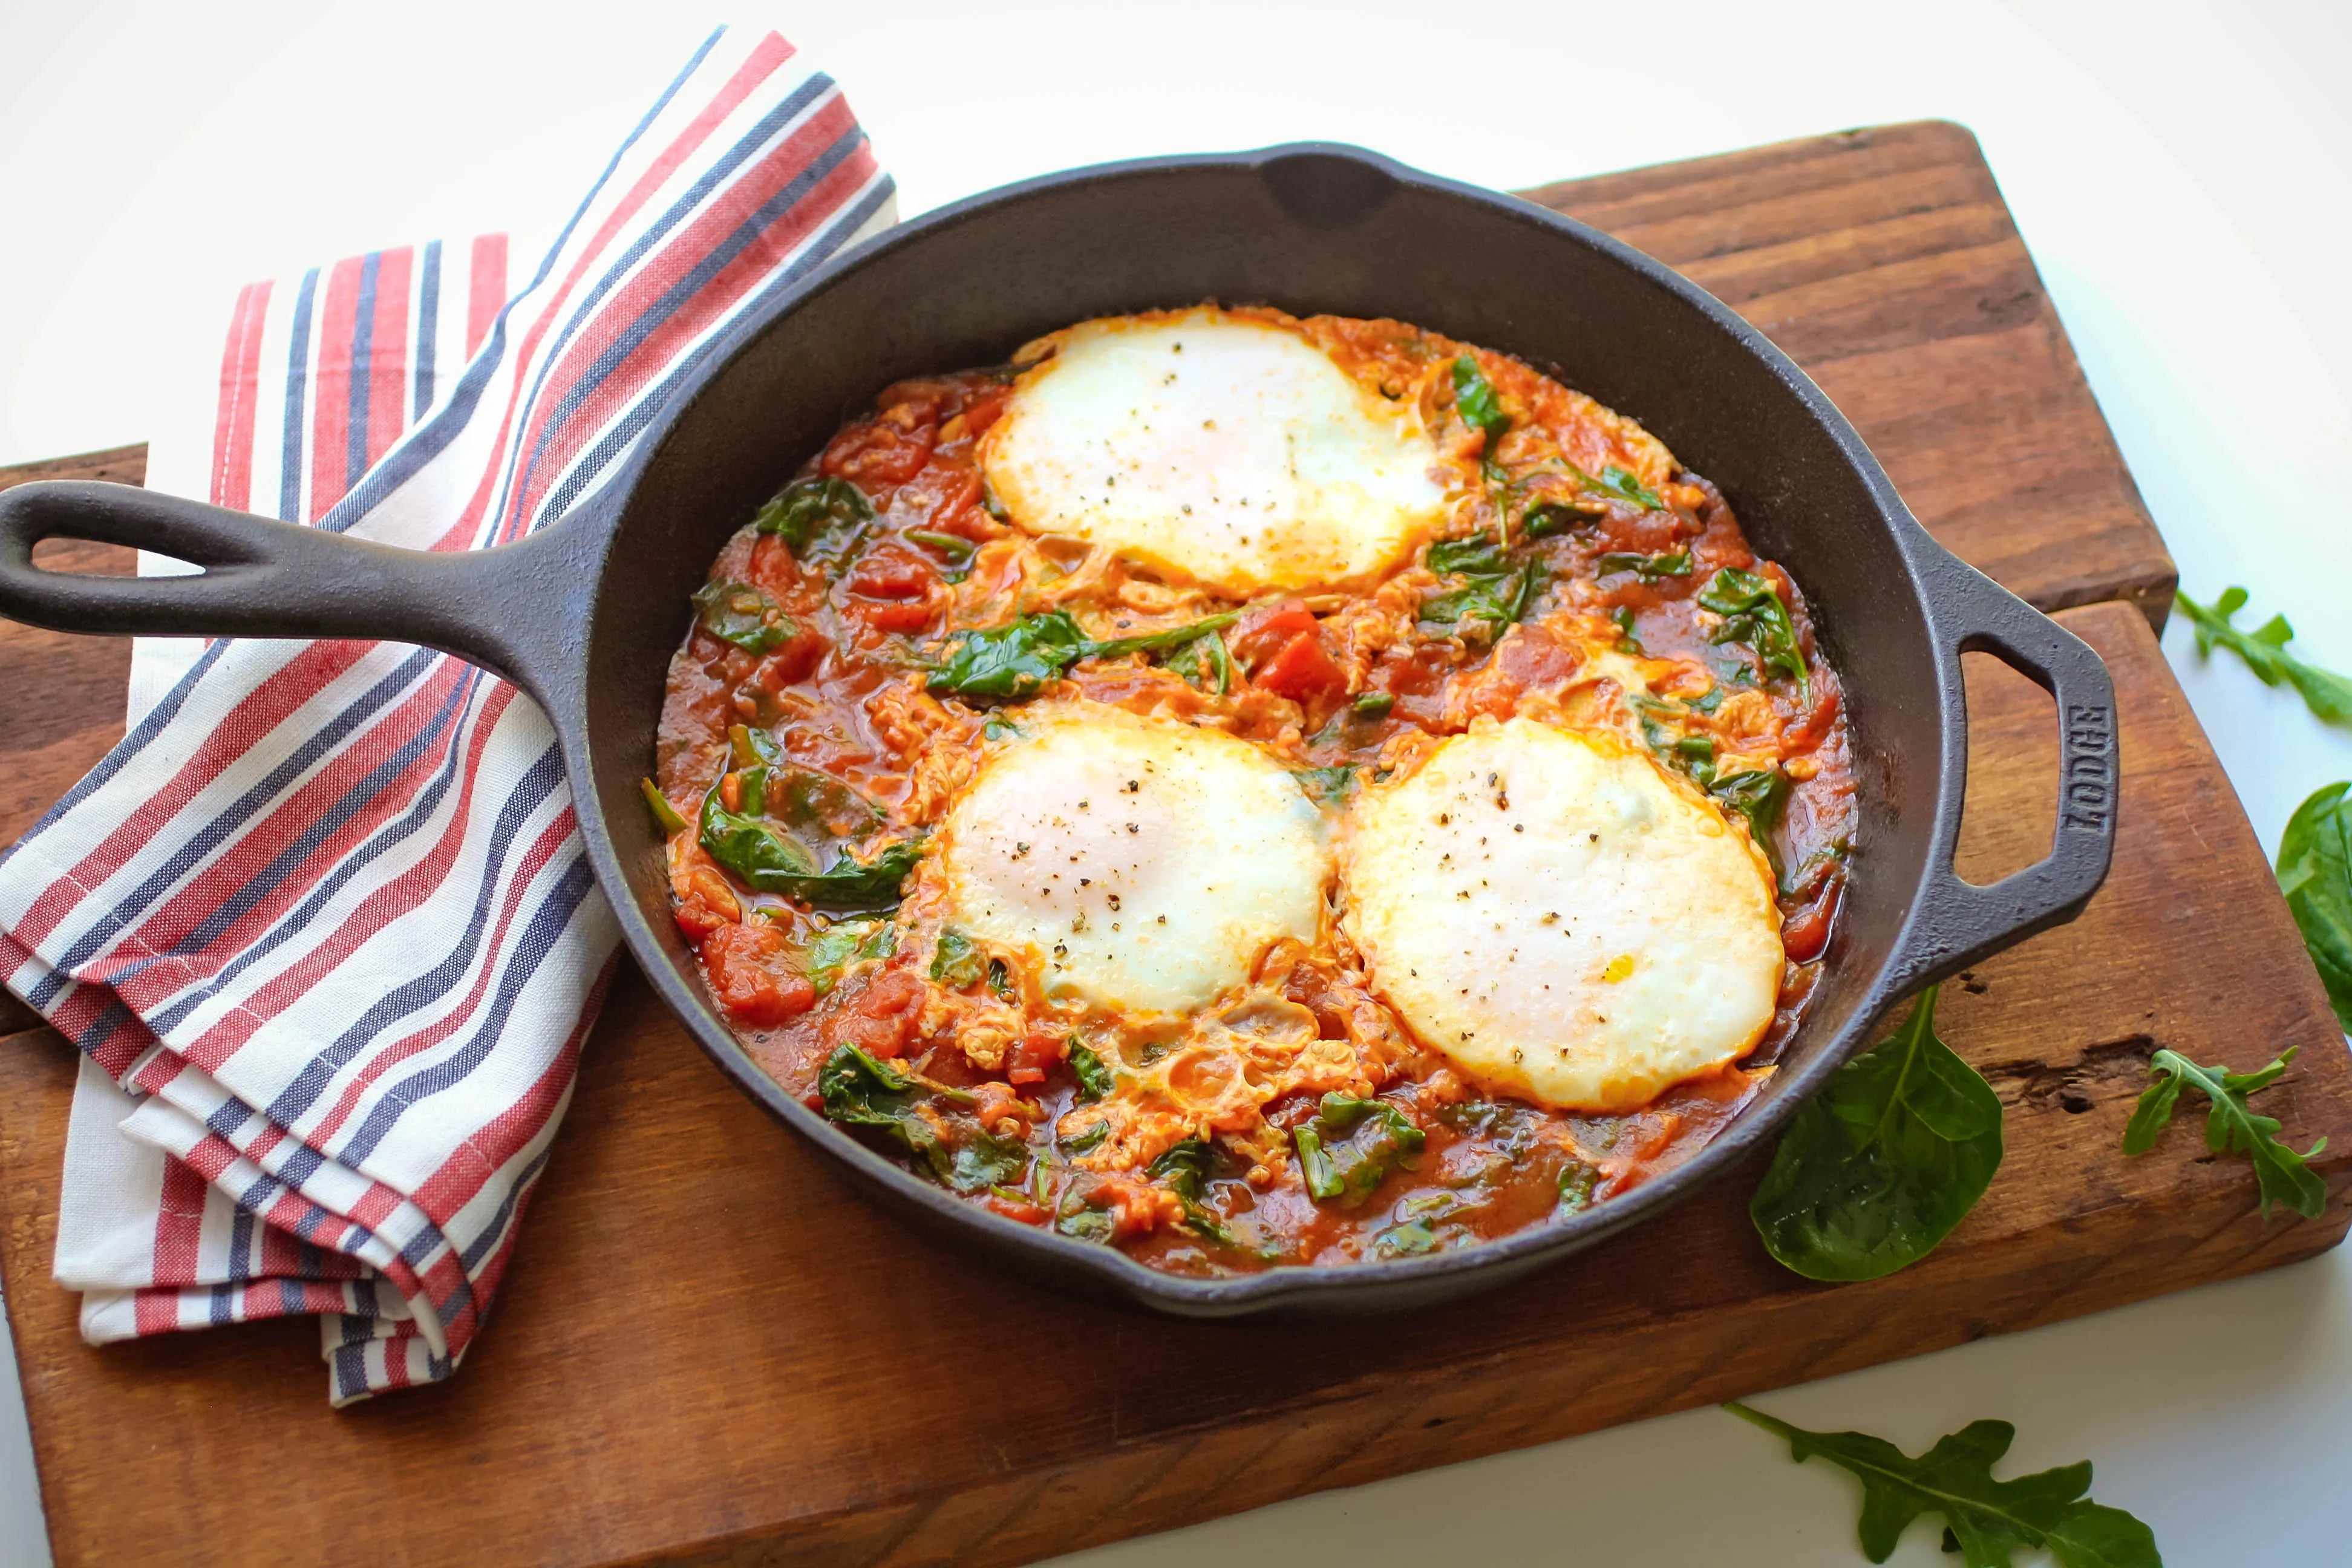 Eggs in Hatch Chile-Spiced Tomato Sauce is a flavorful dish for anytime of day. You'll love Eggs in Hatch Chile-Spiced Tomato Sauce for your next meal.